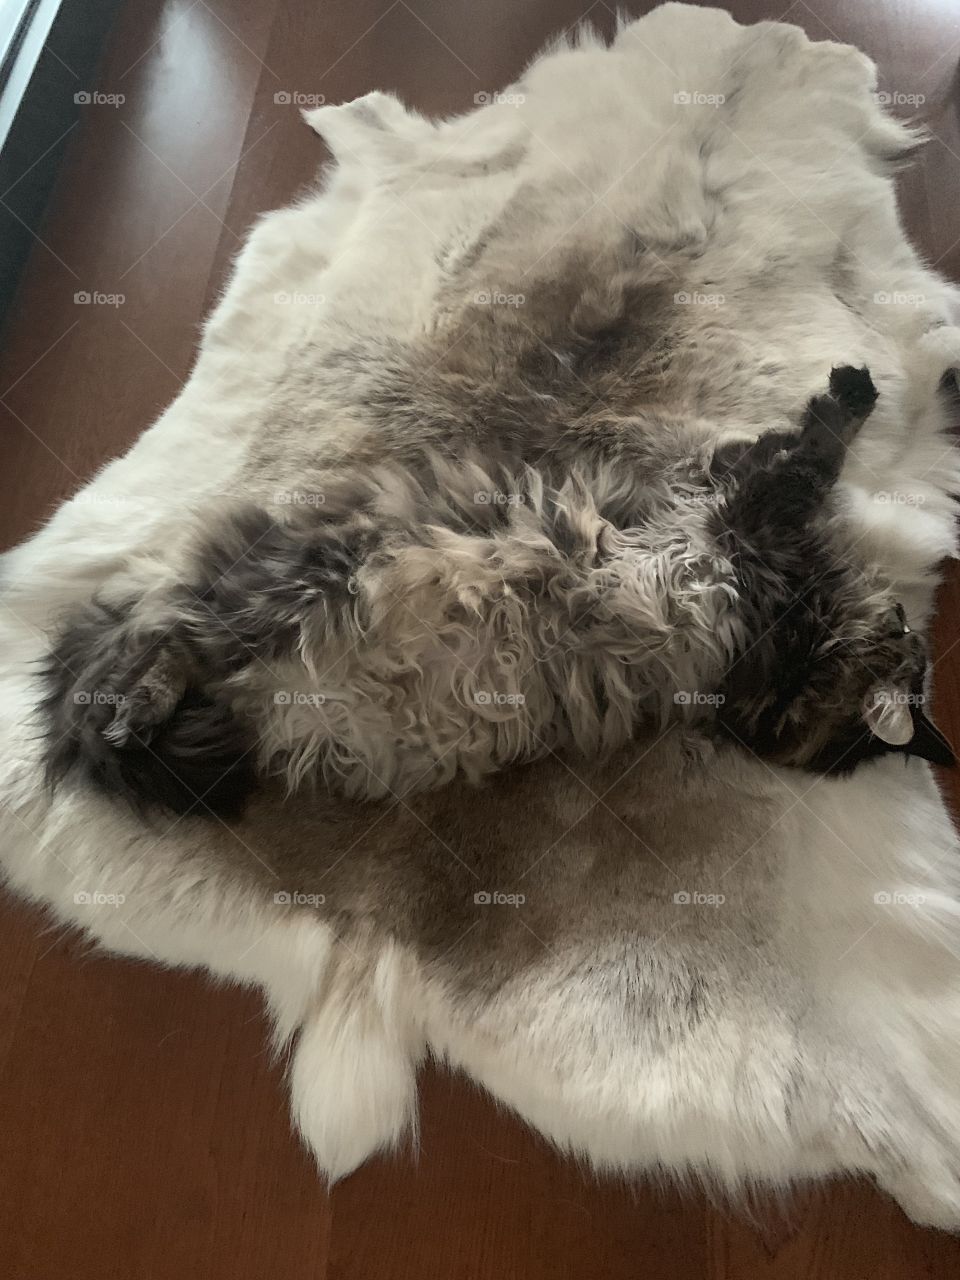 Lazy cat enjoying reindeer carpet in cold winter day...!